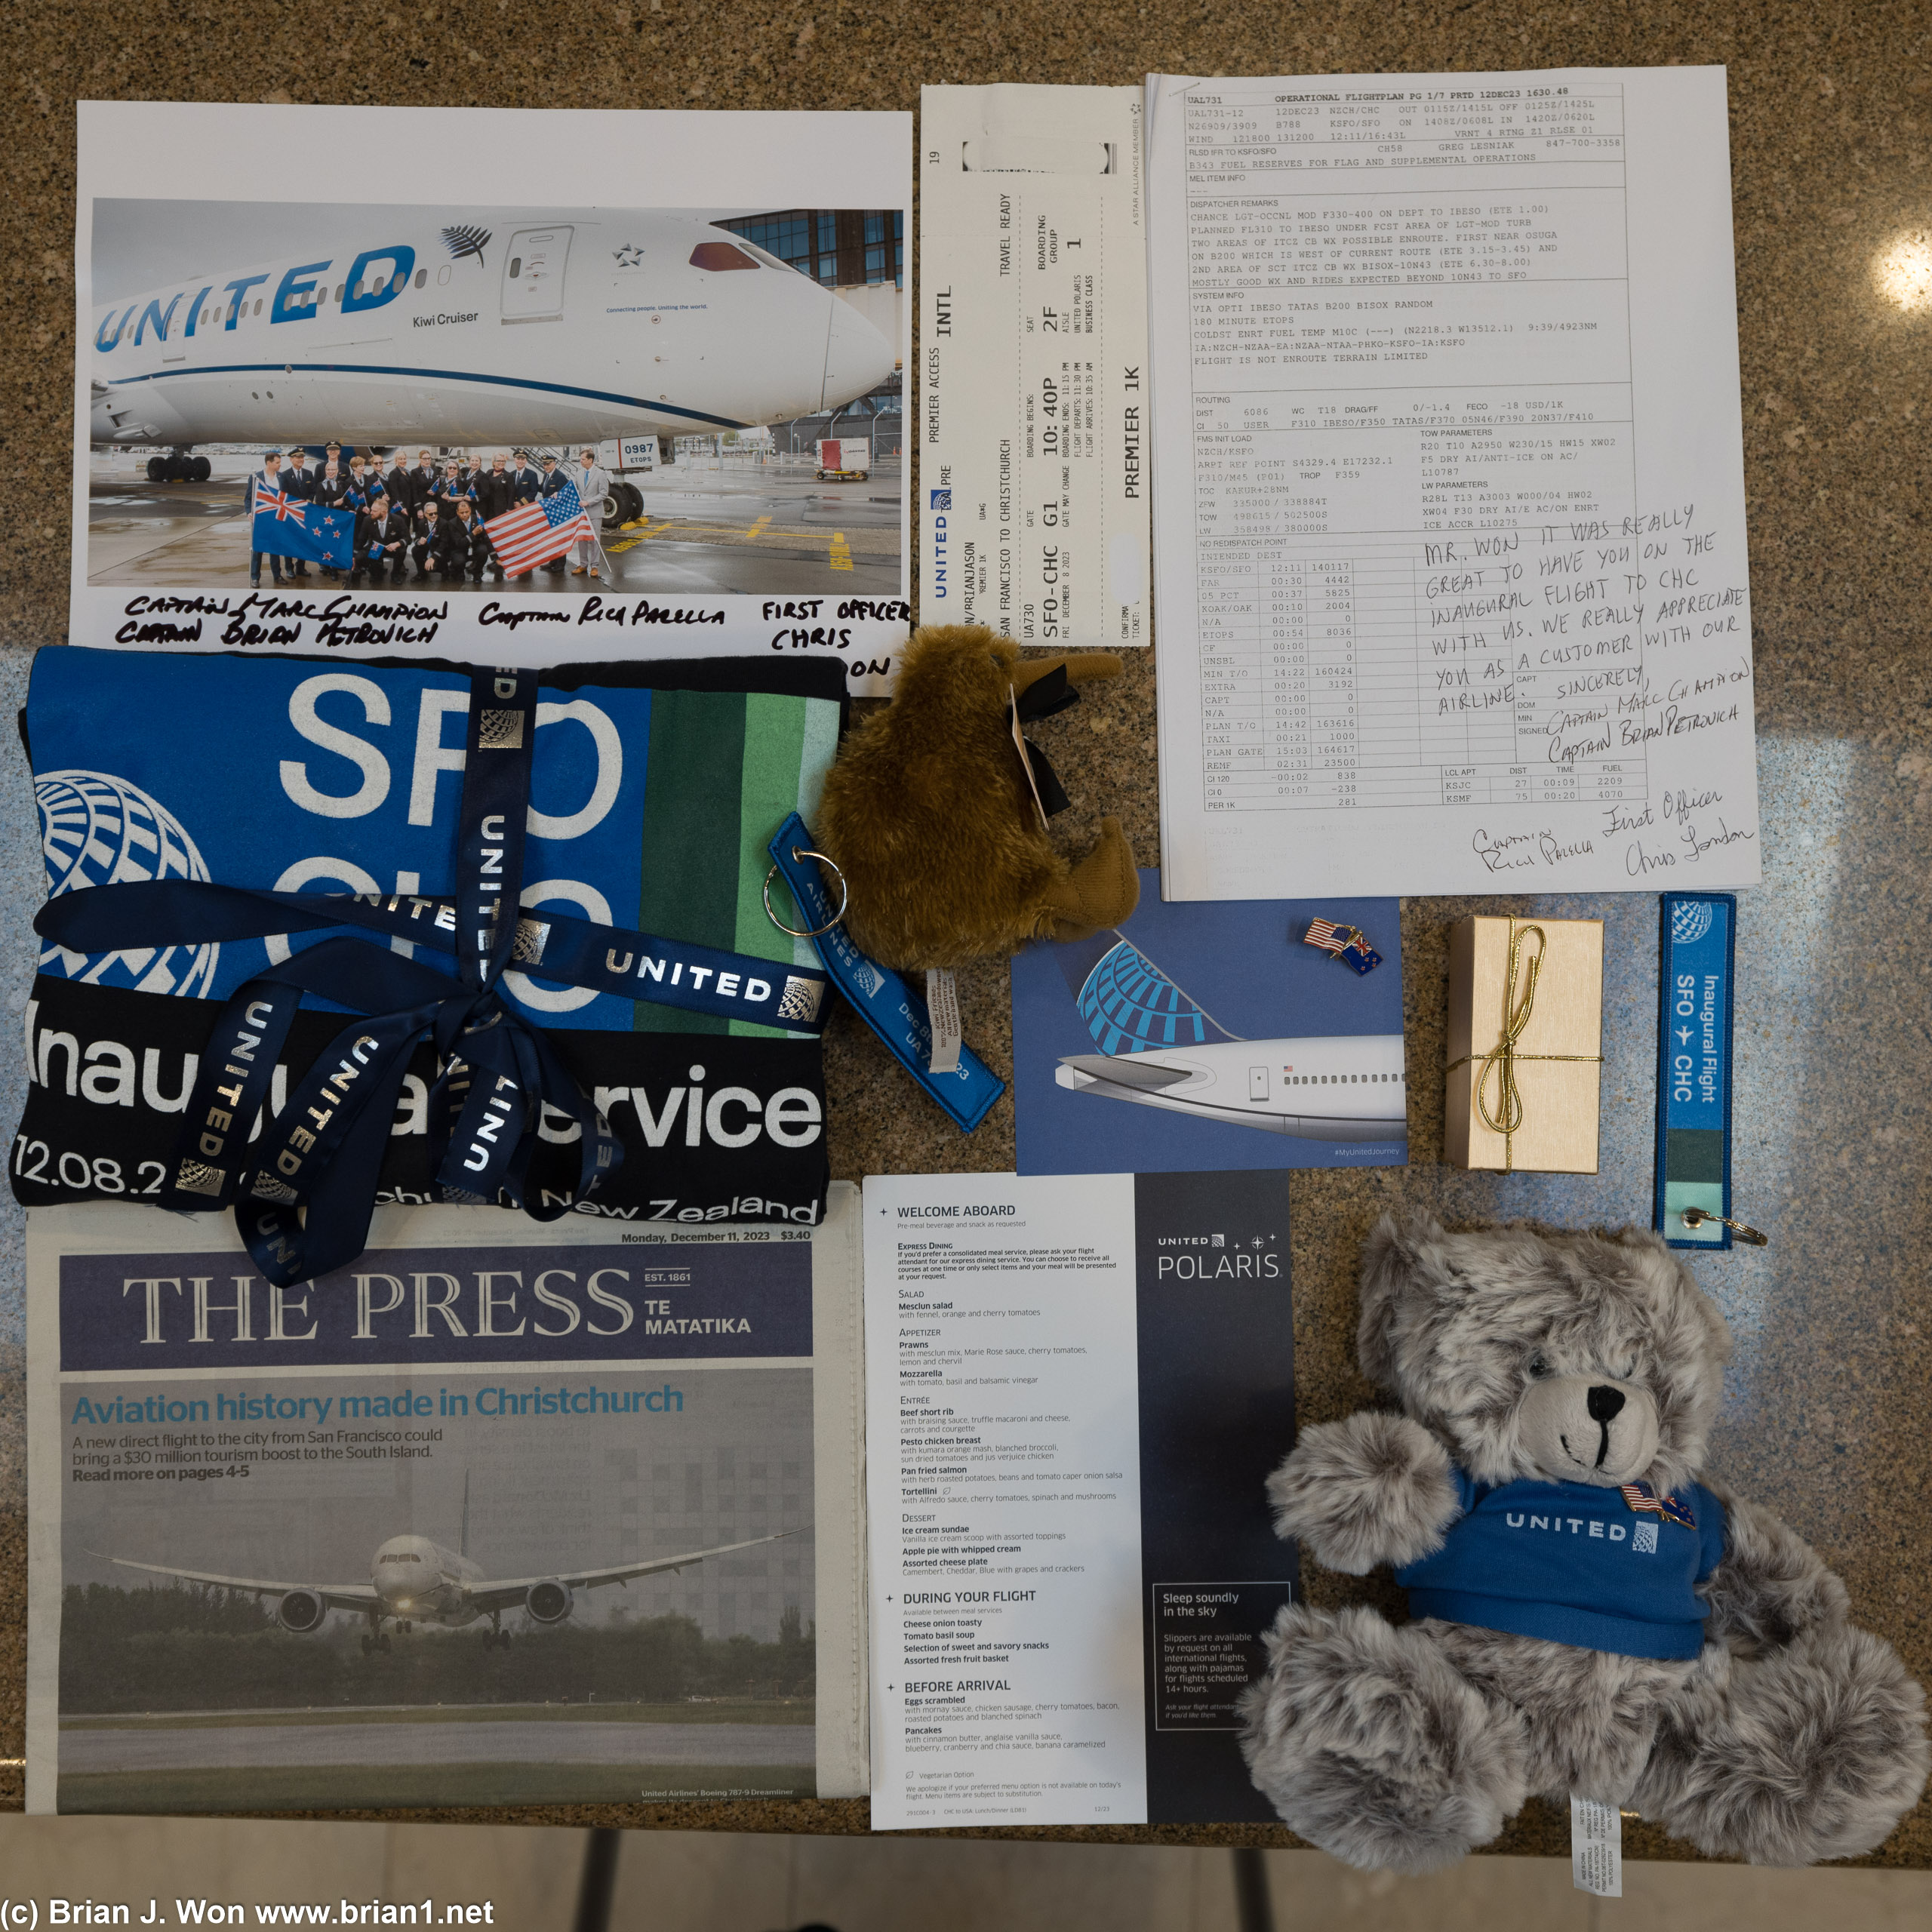 Some of the swag acquired from the inaugural flight and on the return.